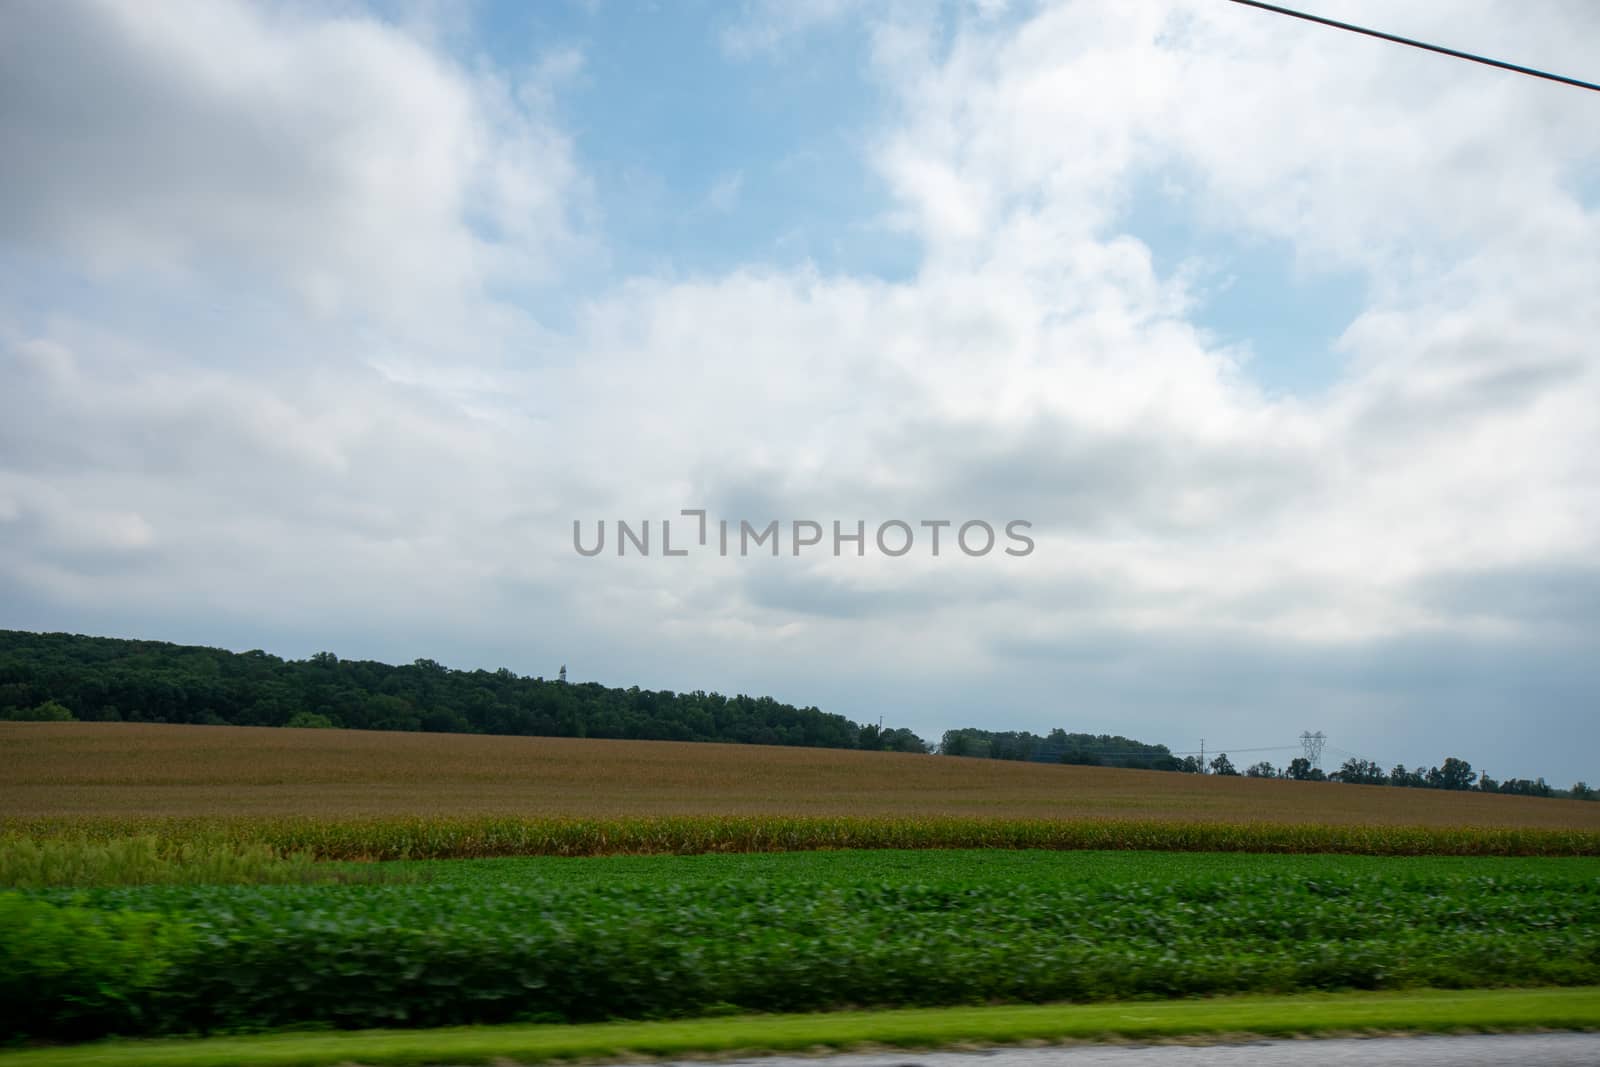 Looking Out the Car at A Huge Field Full of Fresh Crops Flying B by bju12290